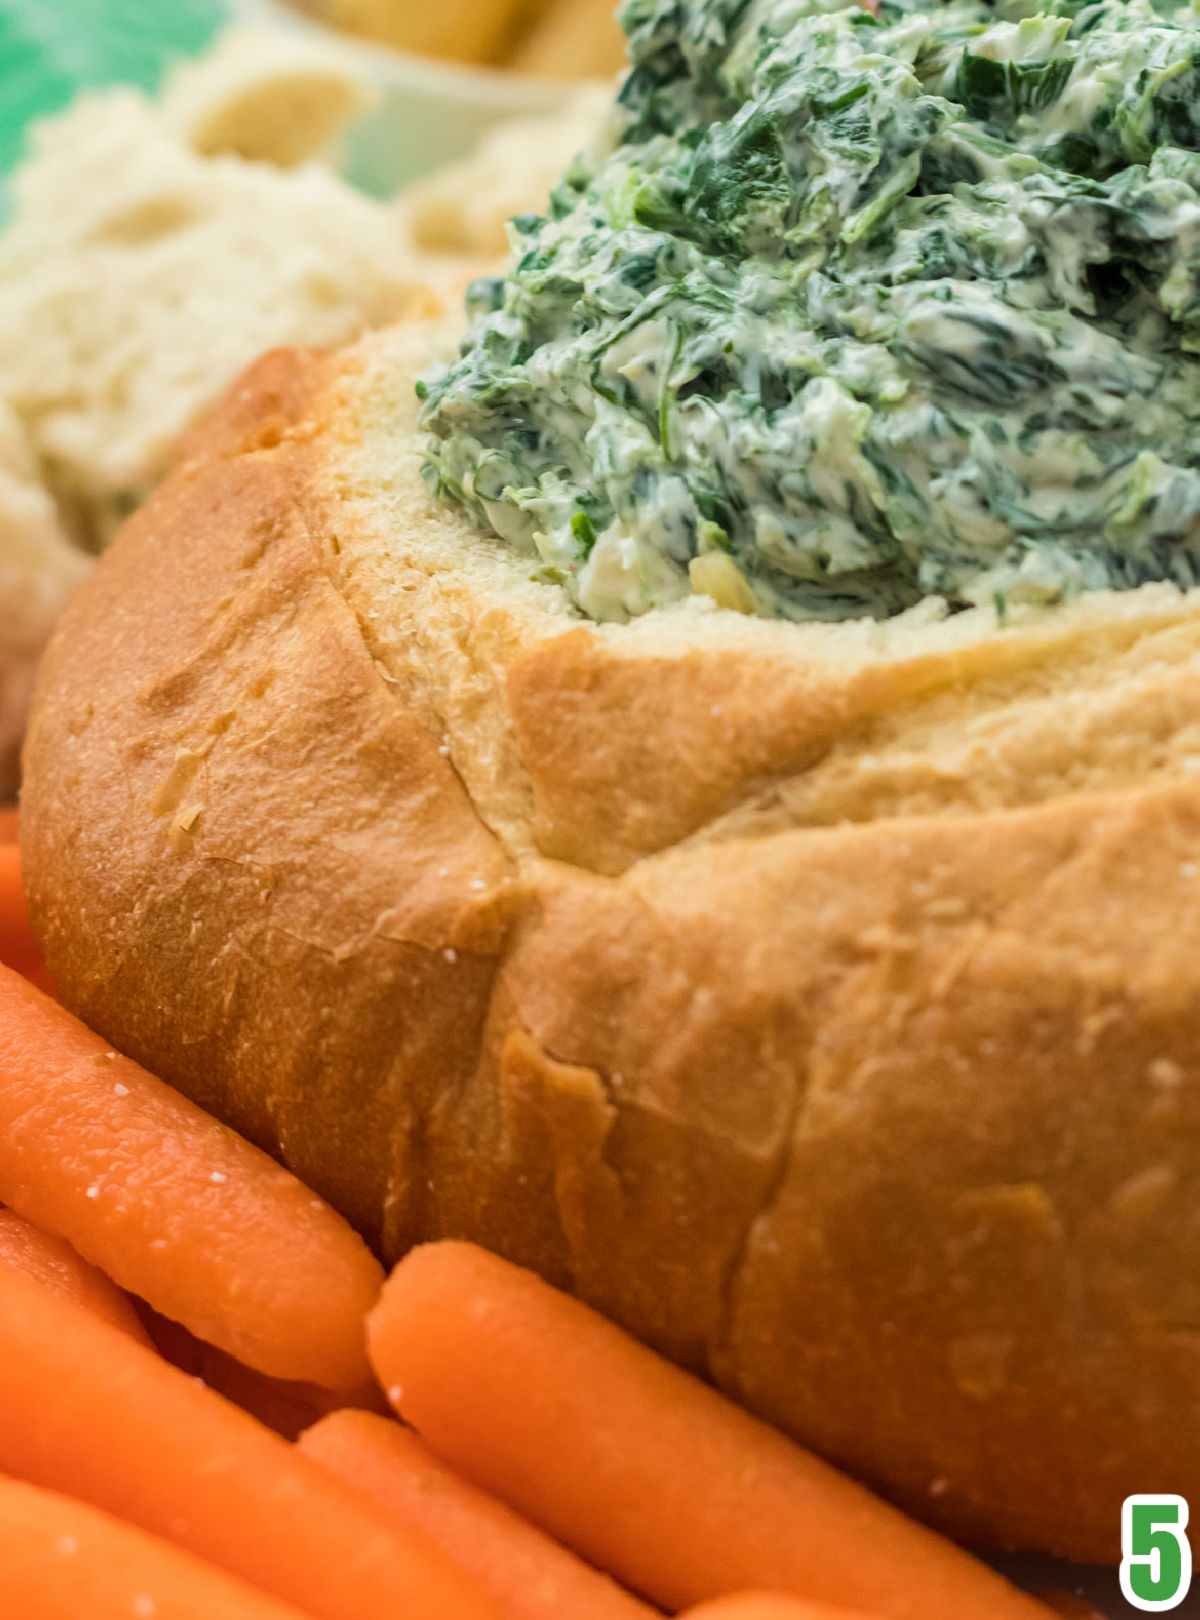 Closeup on a Sourdough round filled with Spinach Dip and surrounded by carrots and pieces of sourdough bread.